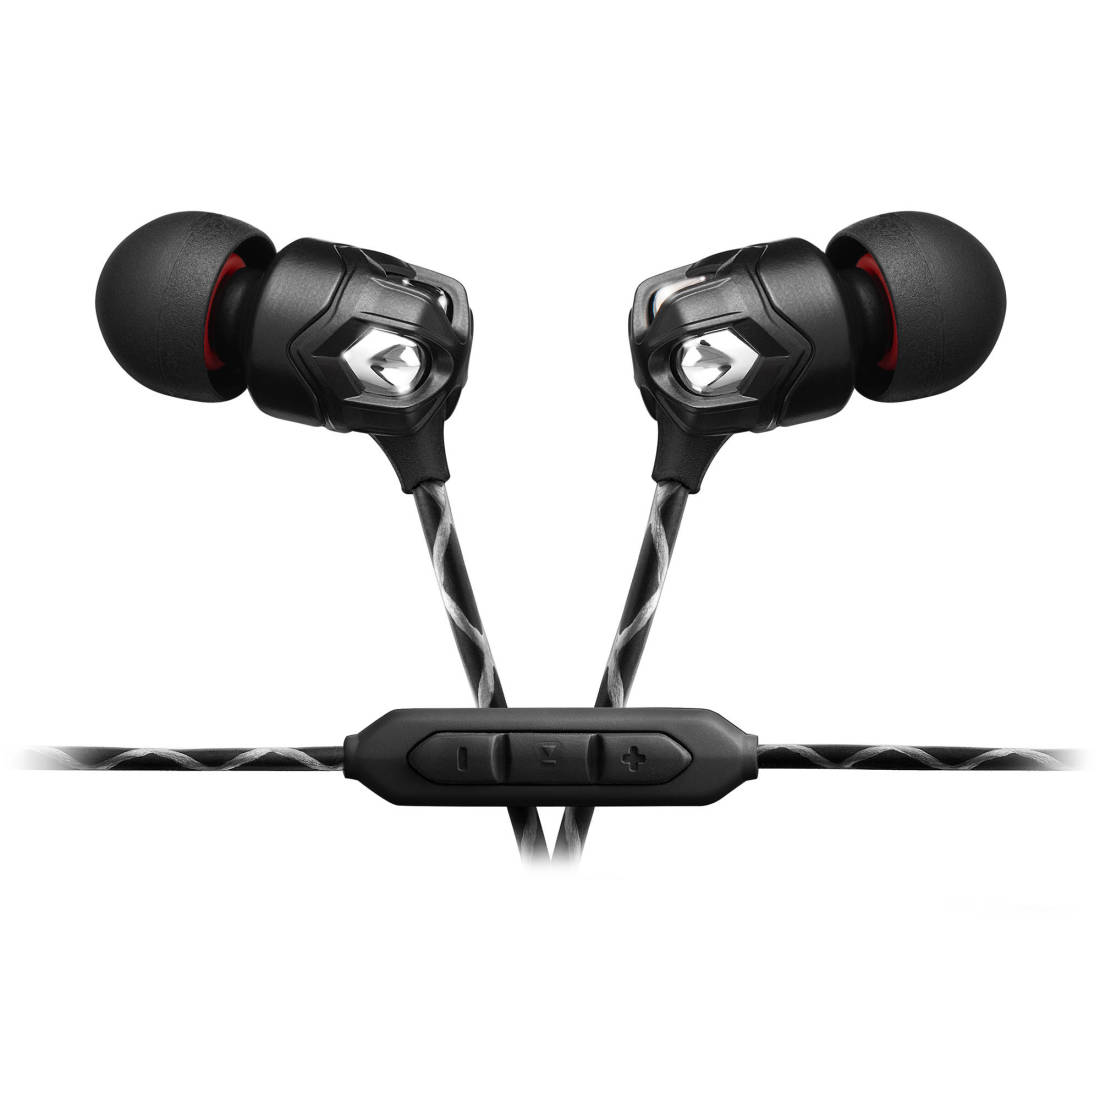 ZN In-Ear Headphones with 3-Button Remote - Black